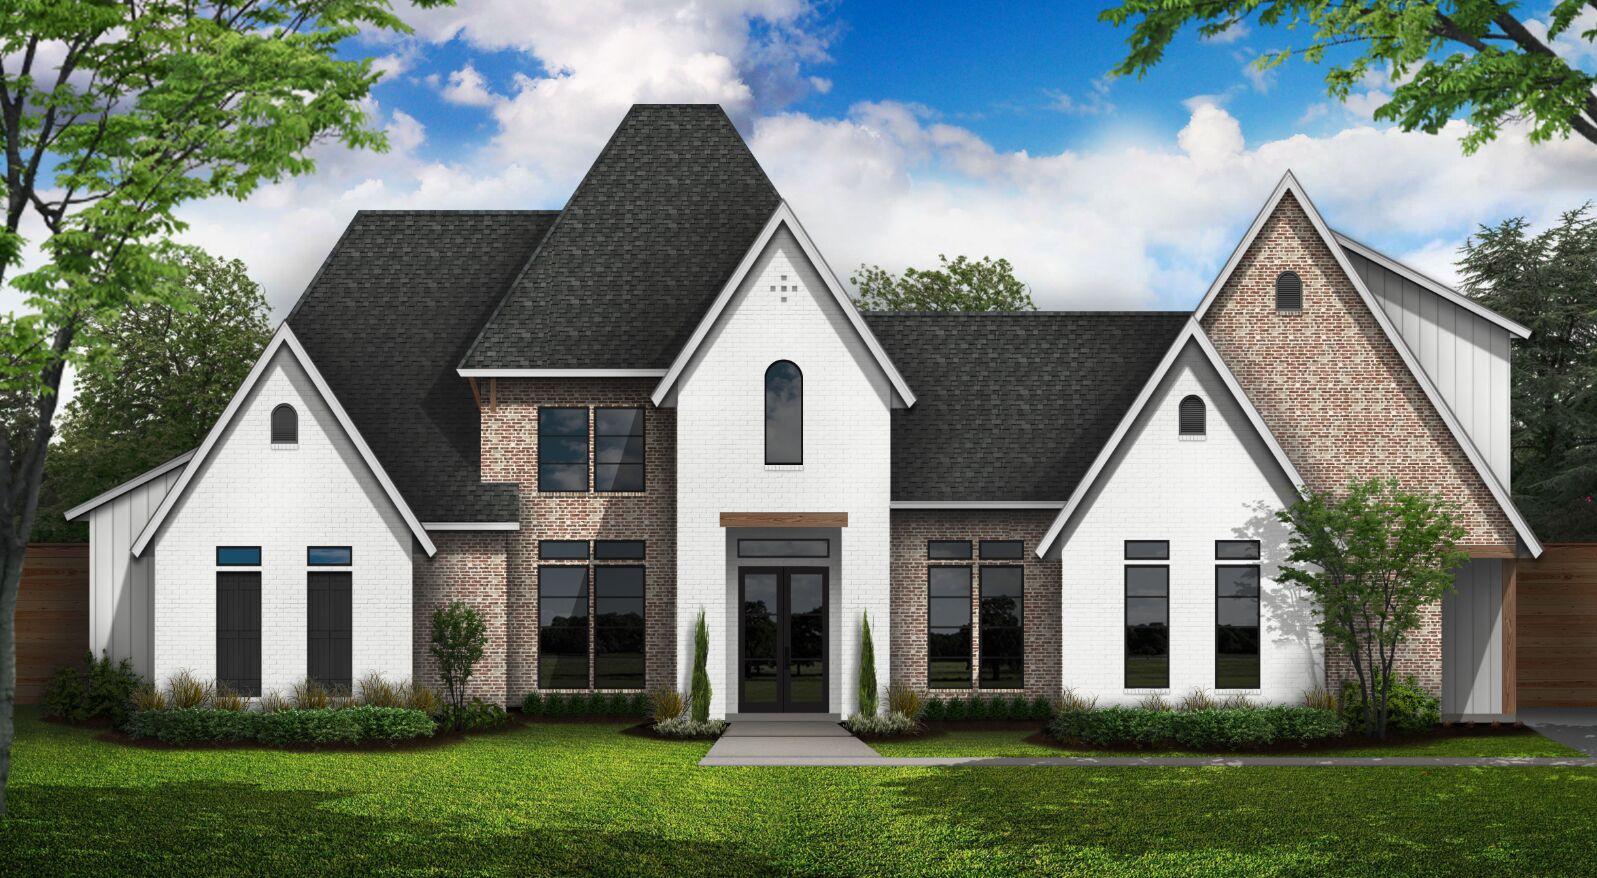 KTBS 3 St. Jude Dream Home is coming to life in Bossier City; Tickets